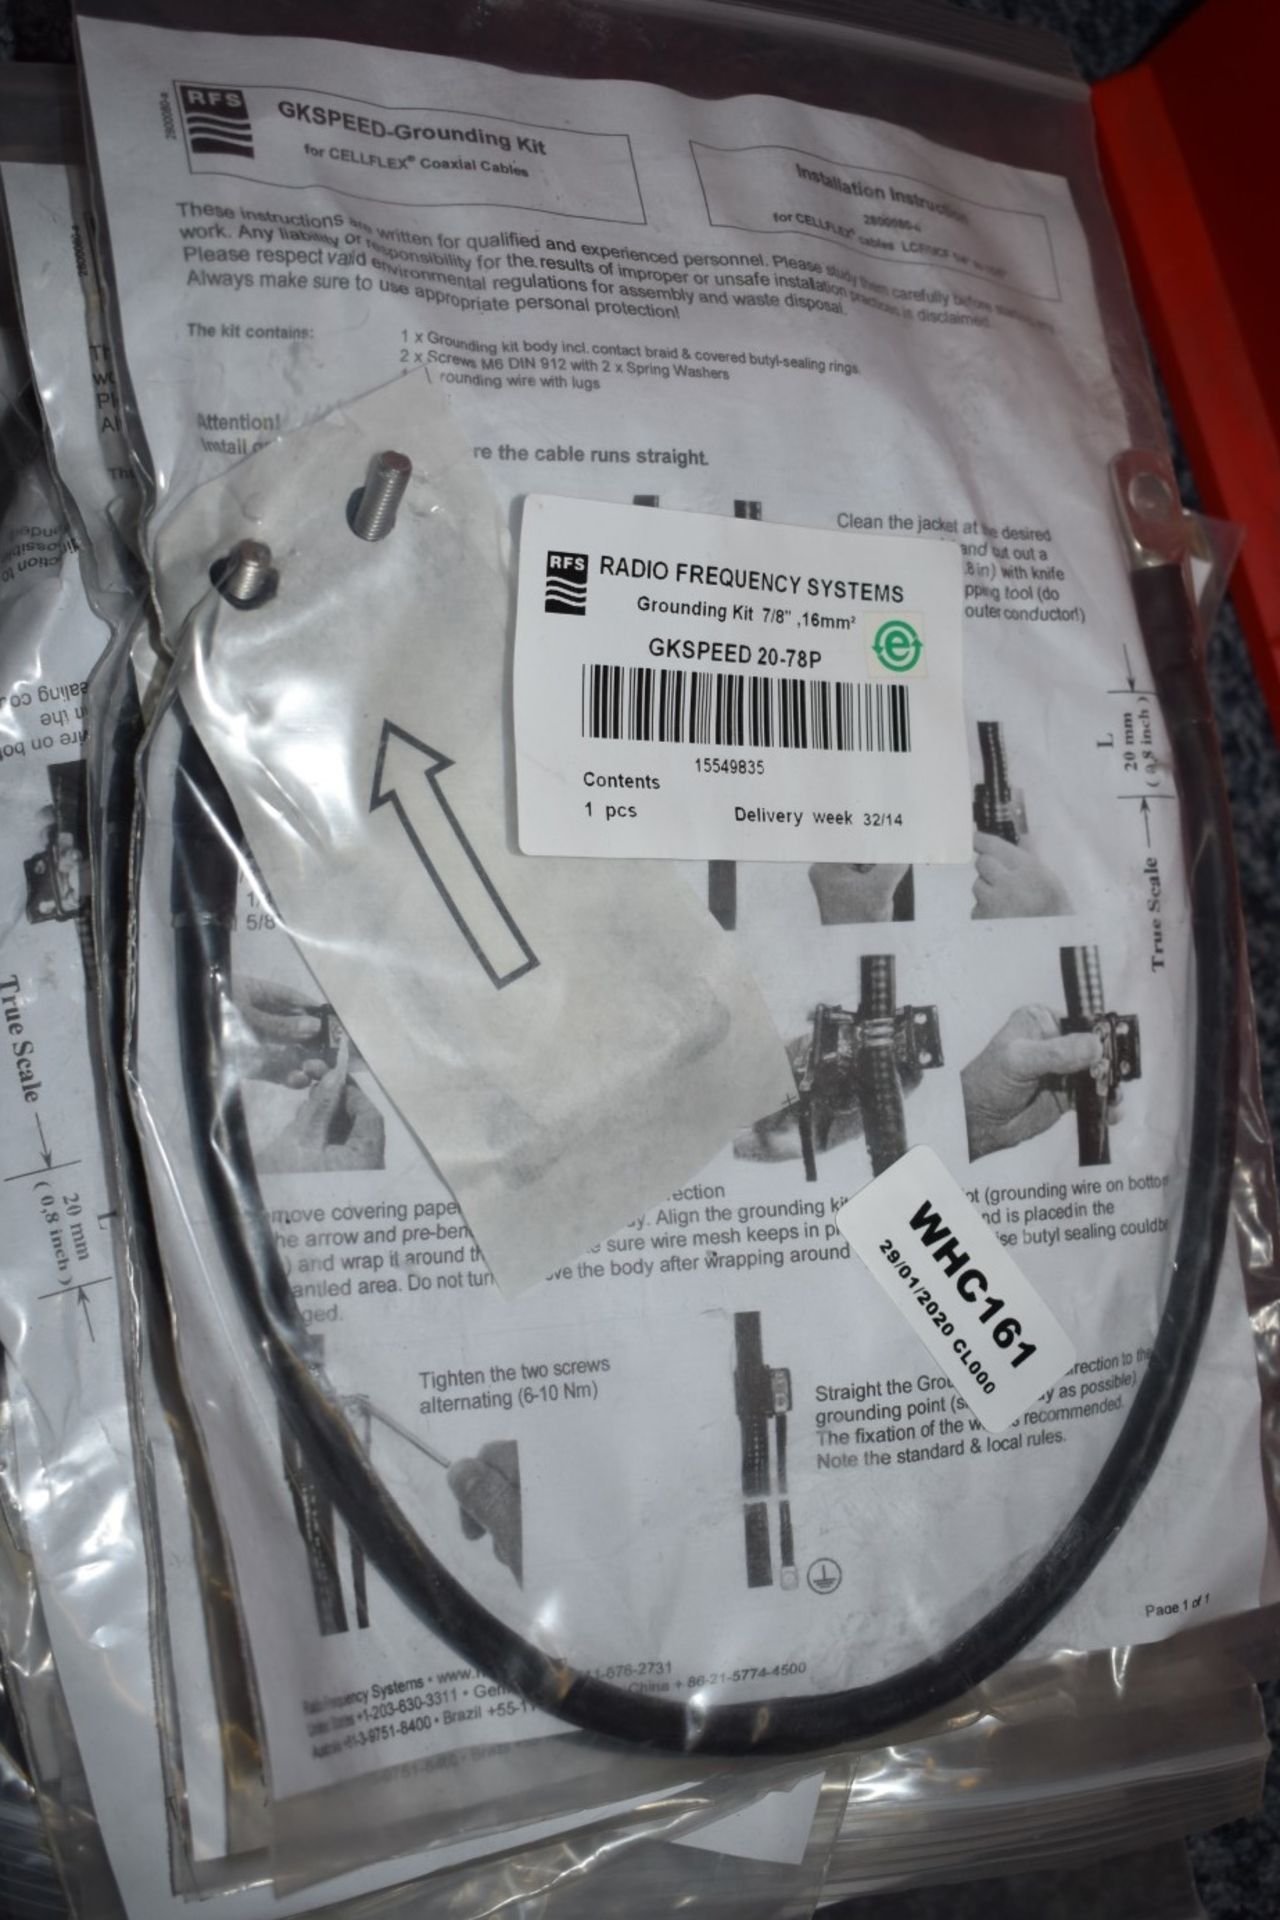 12 x Radio Frequency Systems Grounding Kits 7/8" 16mm - Brand New in Packets - Ref WHC161 WH2 - - Image 3 of 3